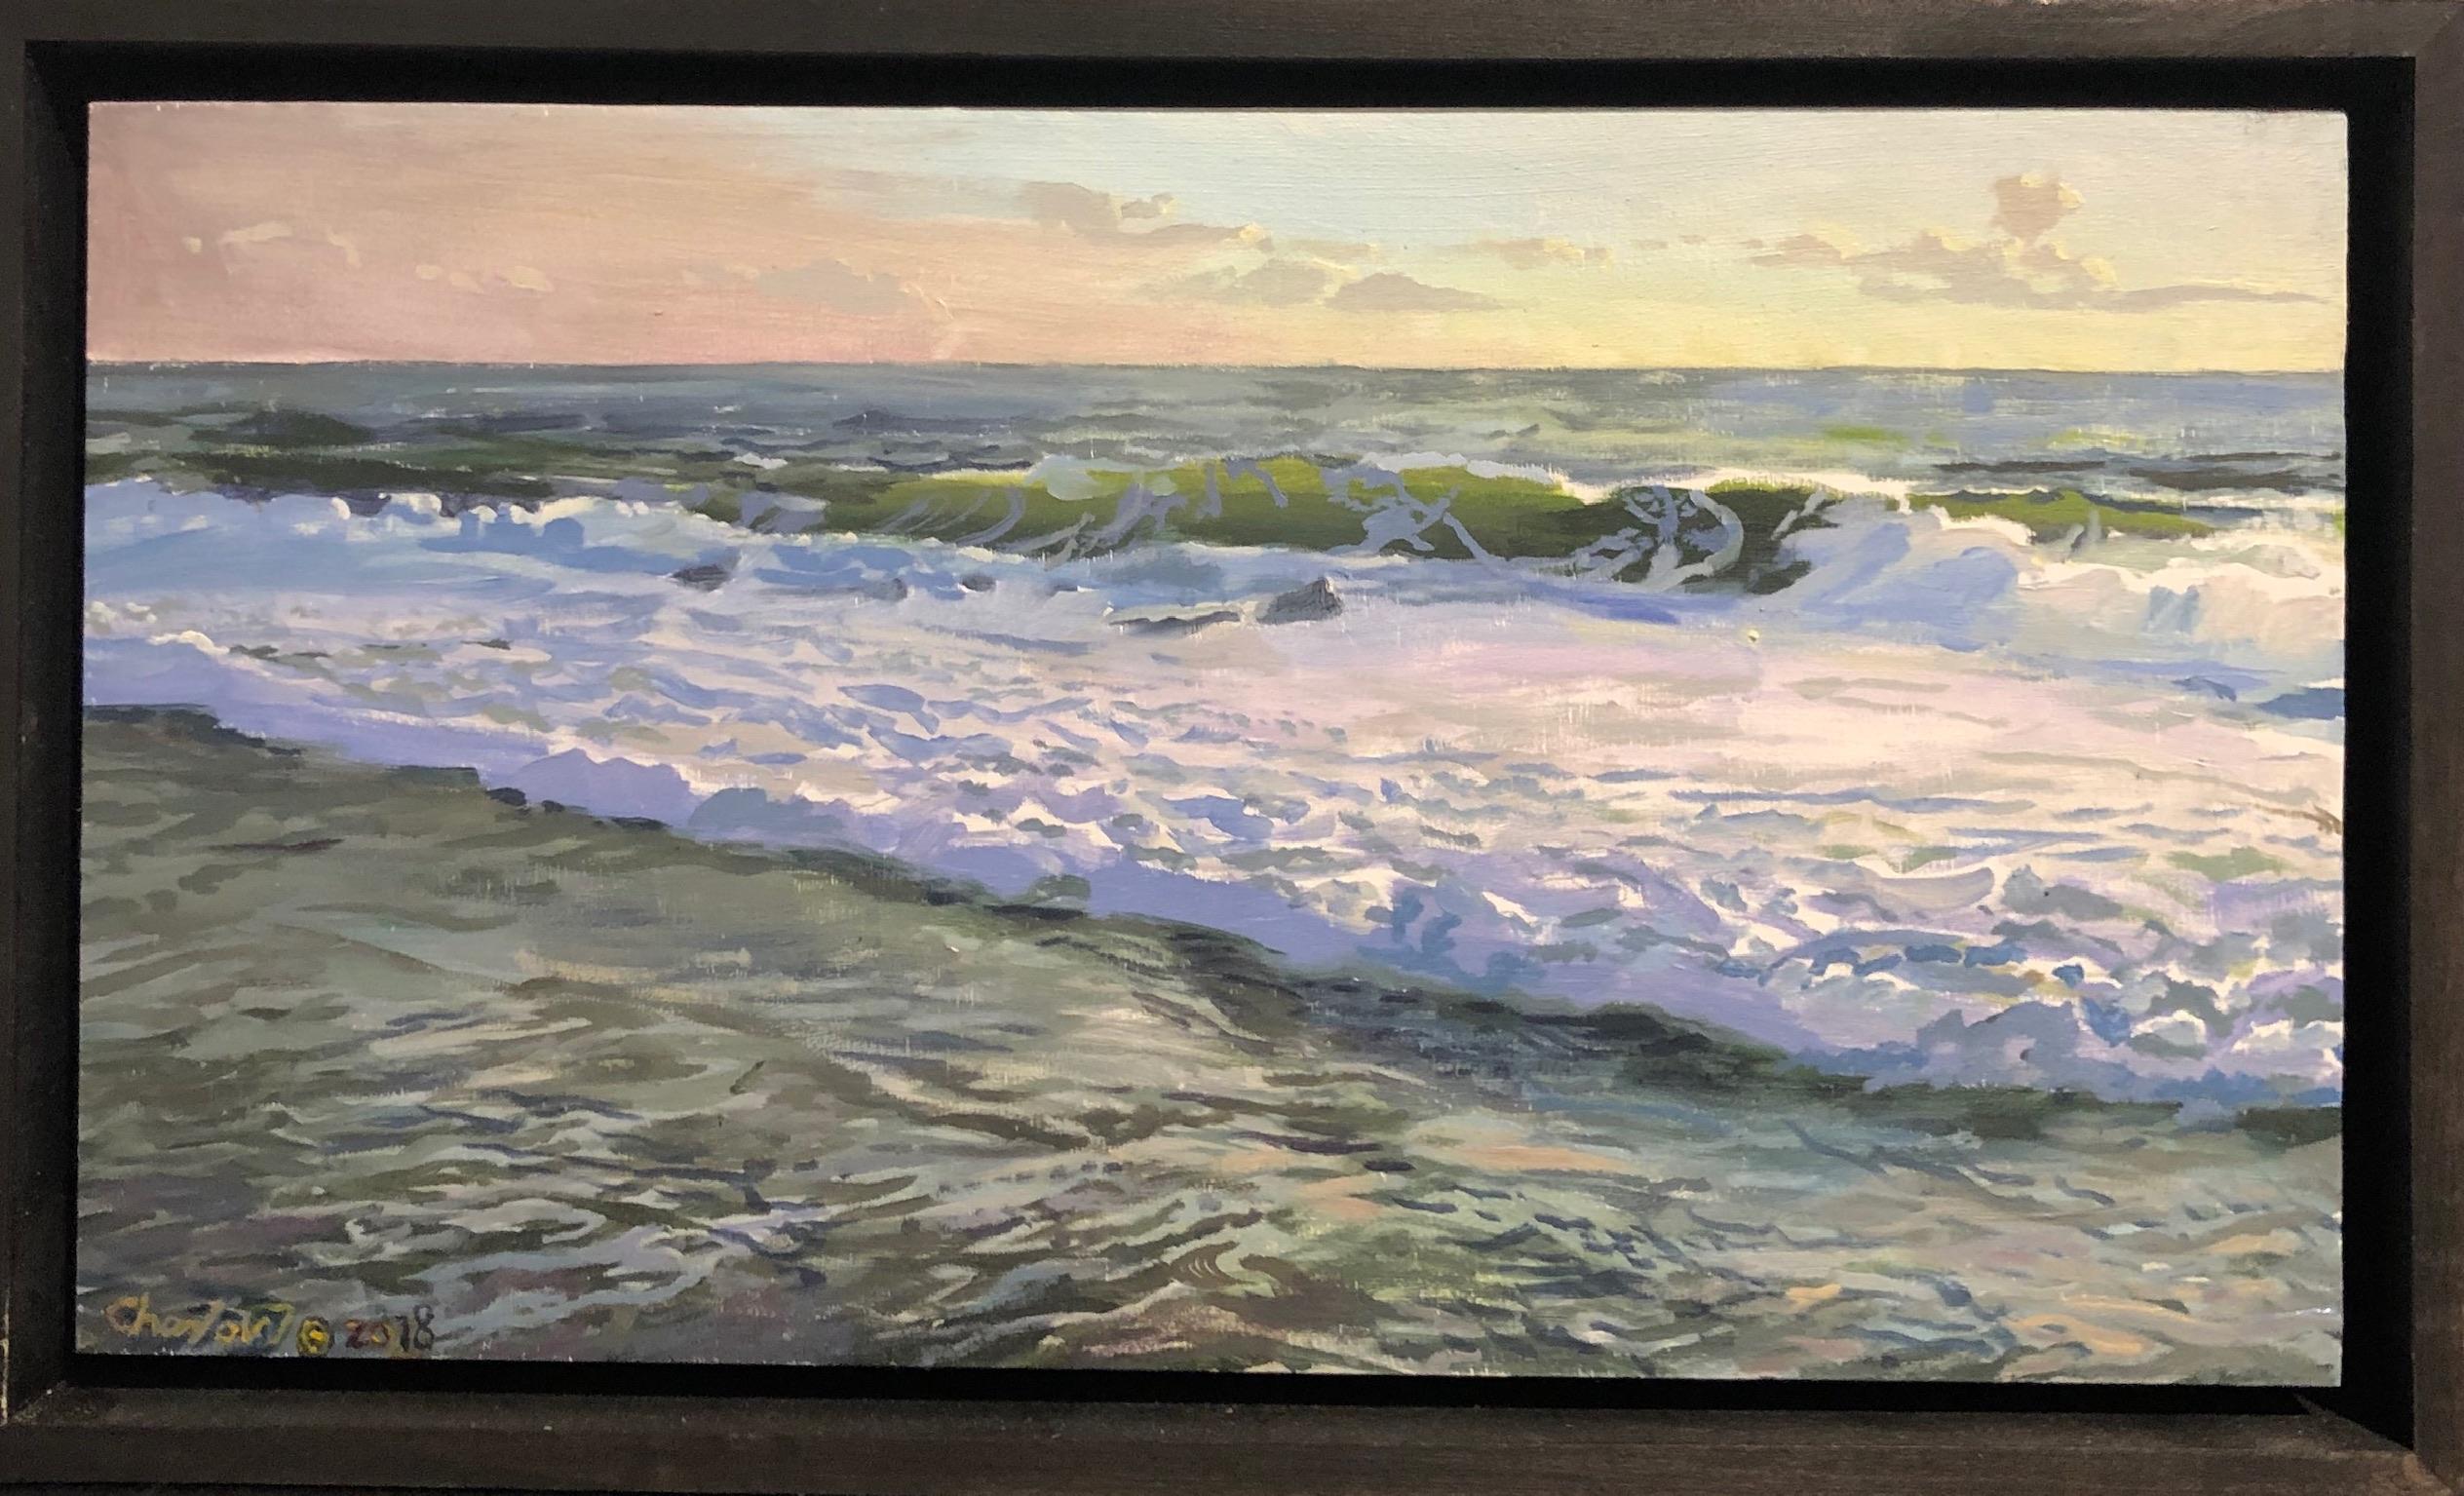 OBX III, Ocean Landscape from the Outer Banks, North Carolina, Oil on Panel - Painting by Art Chartow